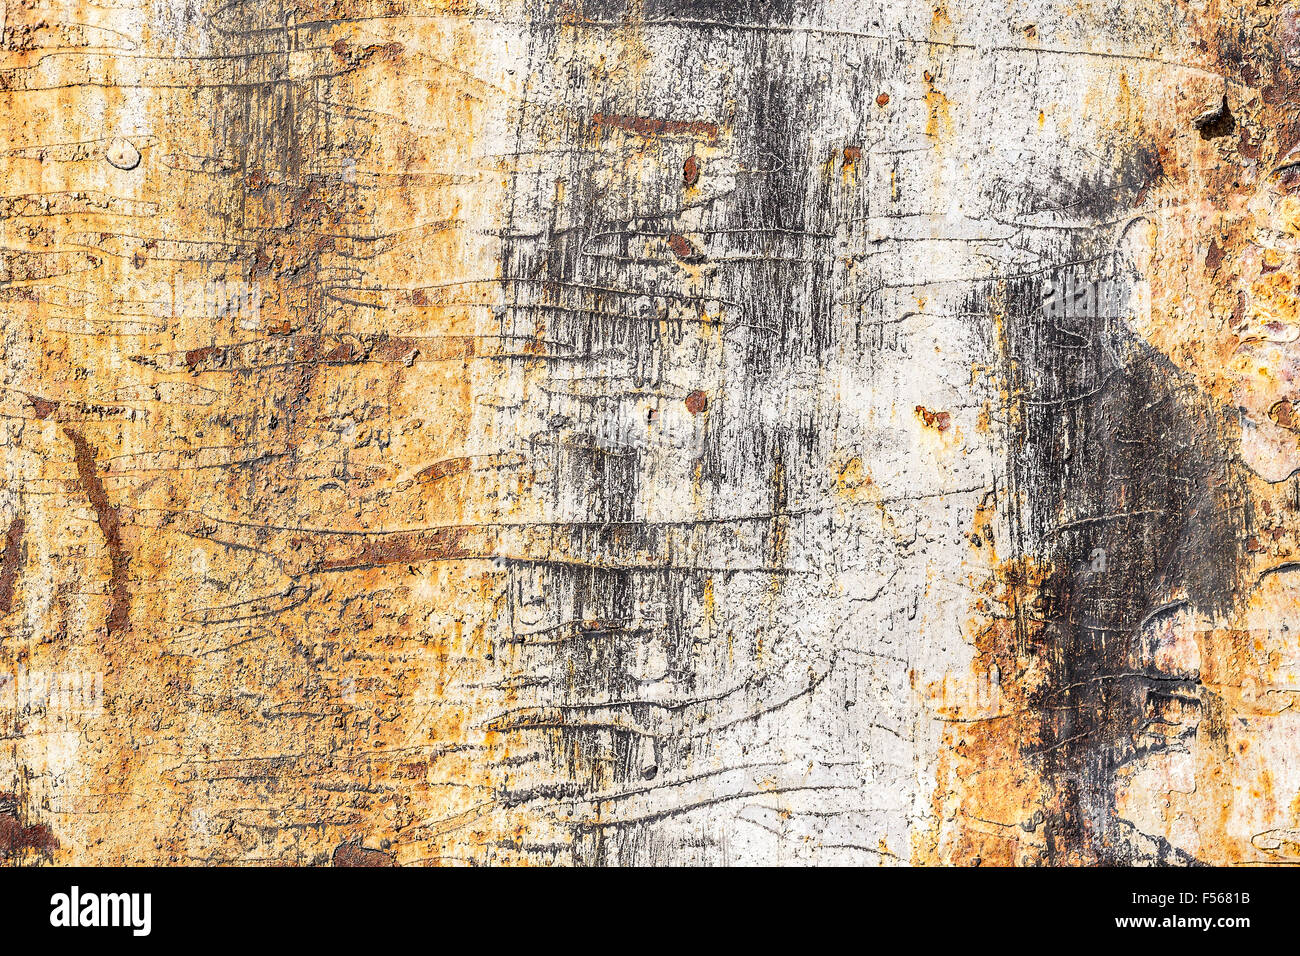 Rusty yellow metal surface texture background Stock Photo